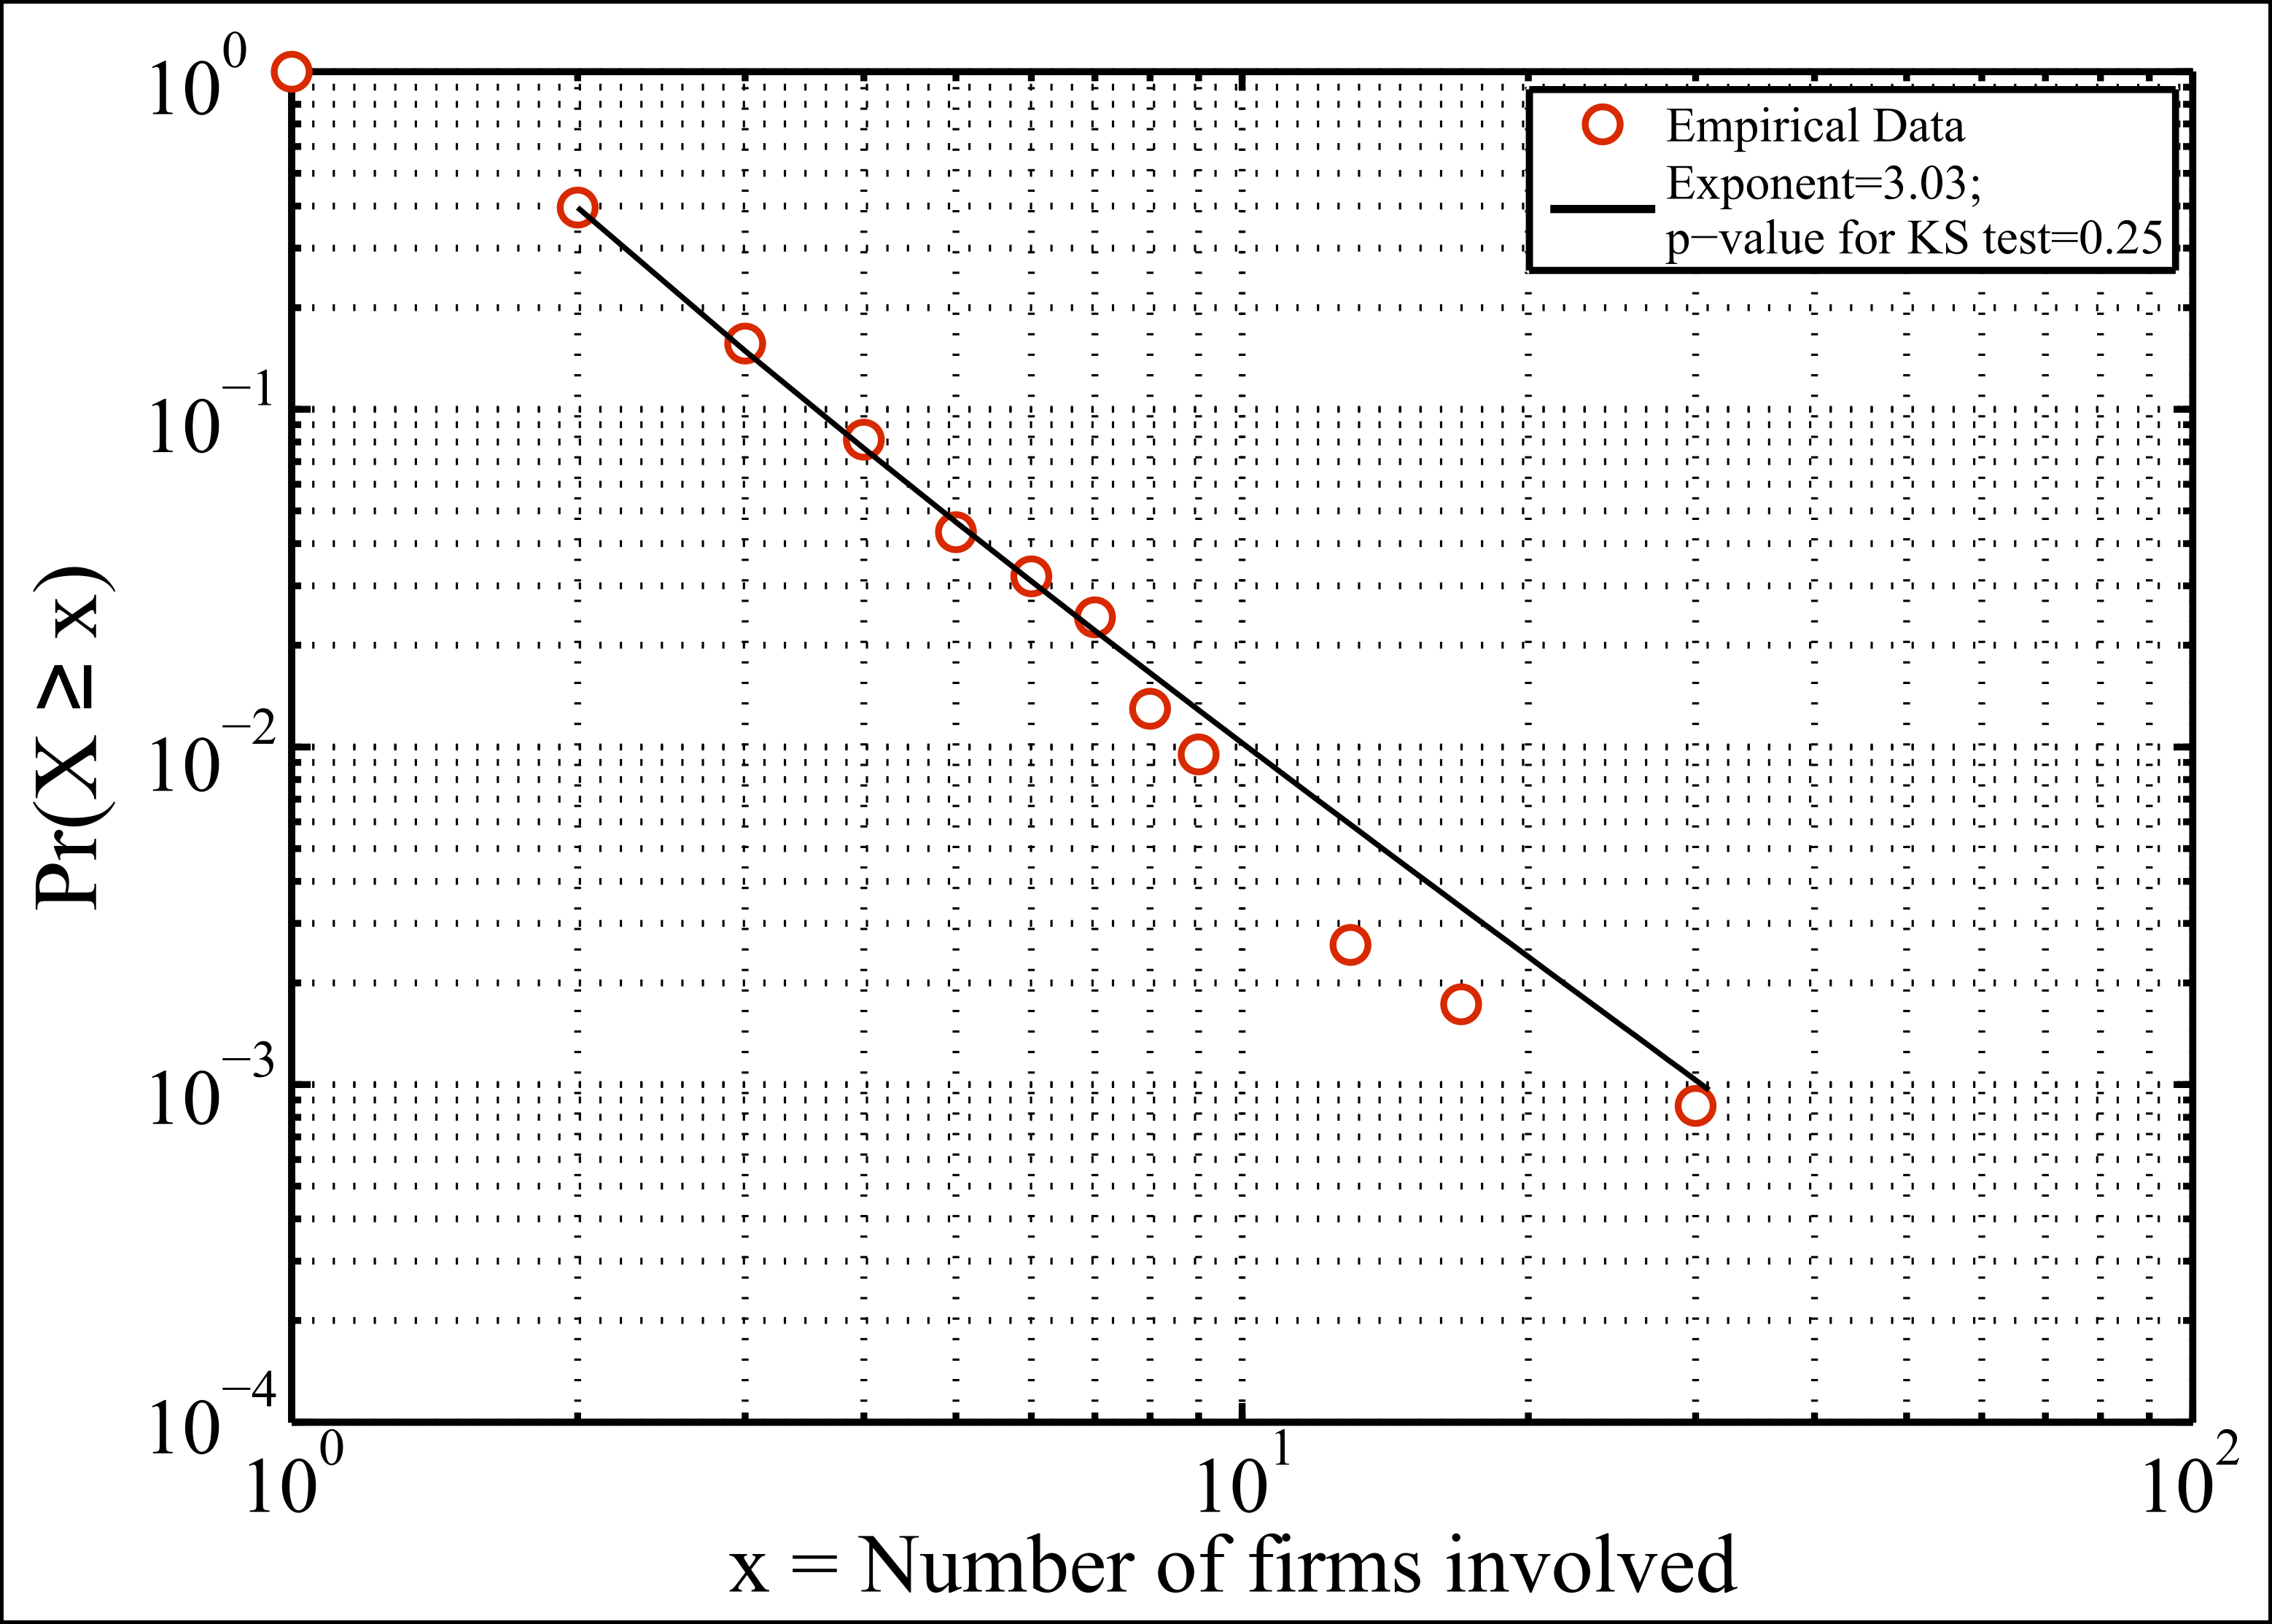 Figure 1: The cumulative probability distribution plot of number of agents involved in a single loss event, as recorder within the ORIC database, over a space of 6 years. Empirical data (circles) can be closely matched by a straight fit line (dotted), suggestive of a power law distribution. In the context of this work, single loss event are considered to be materialised cascades, where the number of firms involved represents the size of the cascade.